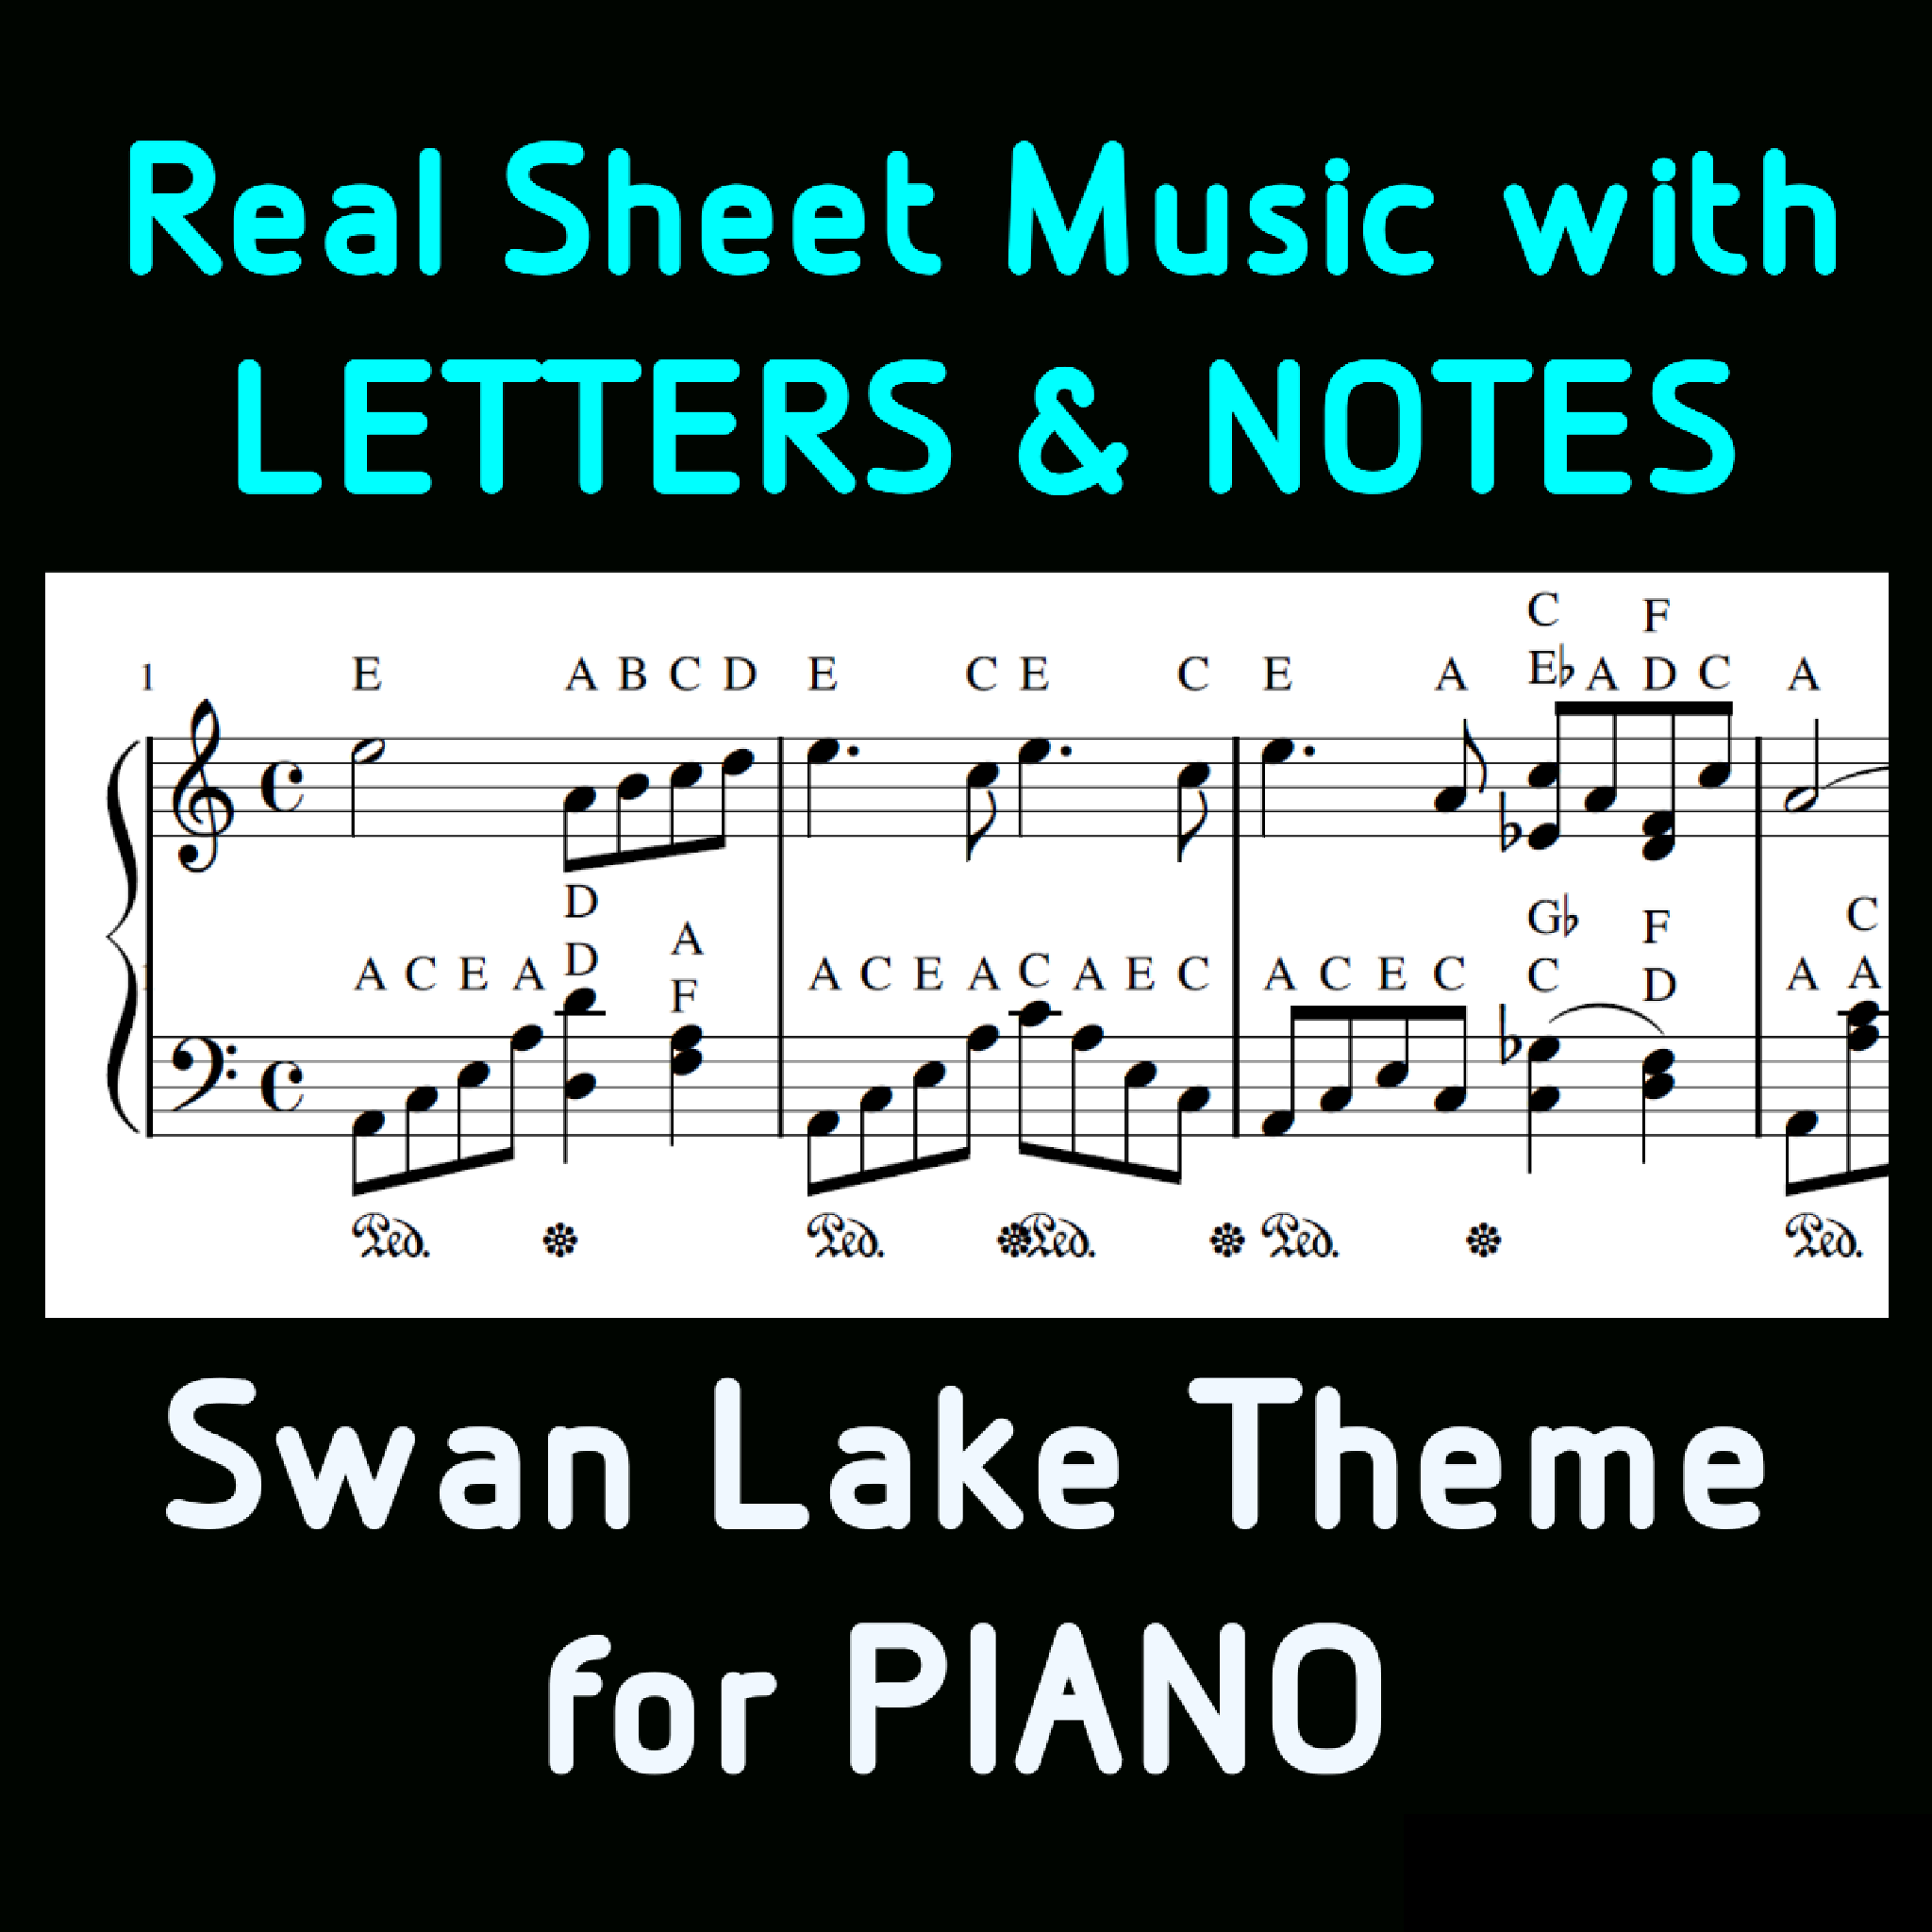 swan-lake-theme-piano-sheet-music-with-letters-and-notes-together-read-piano-music-now